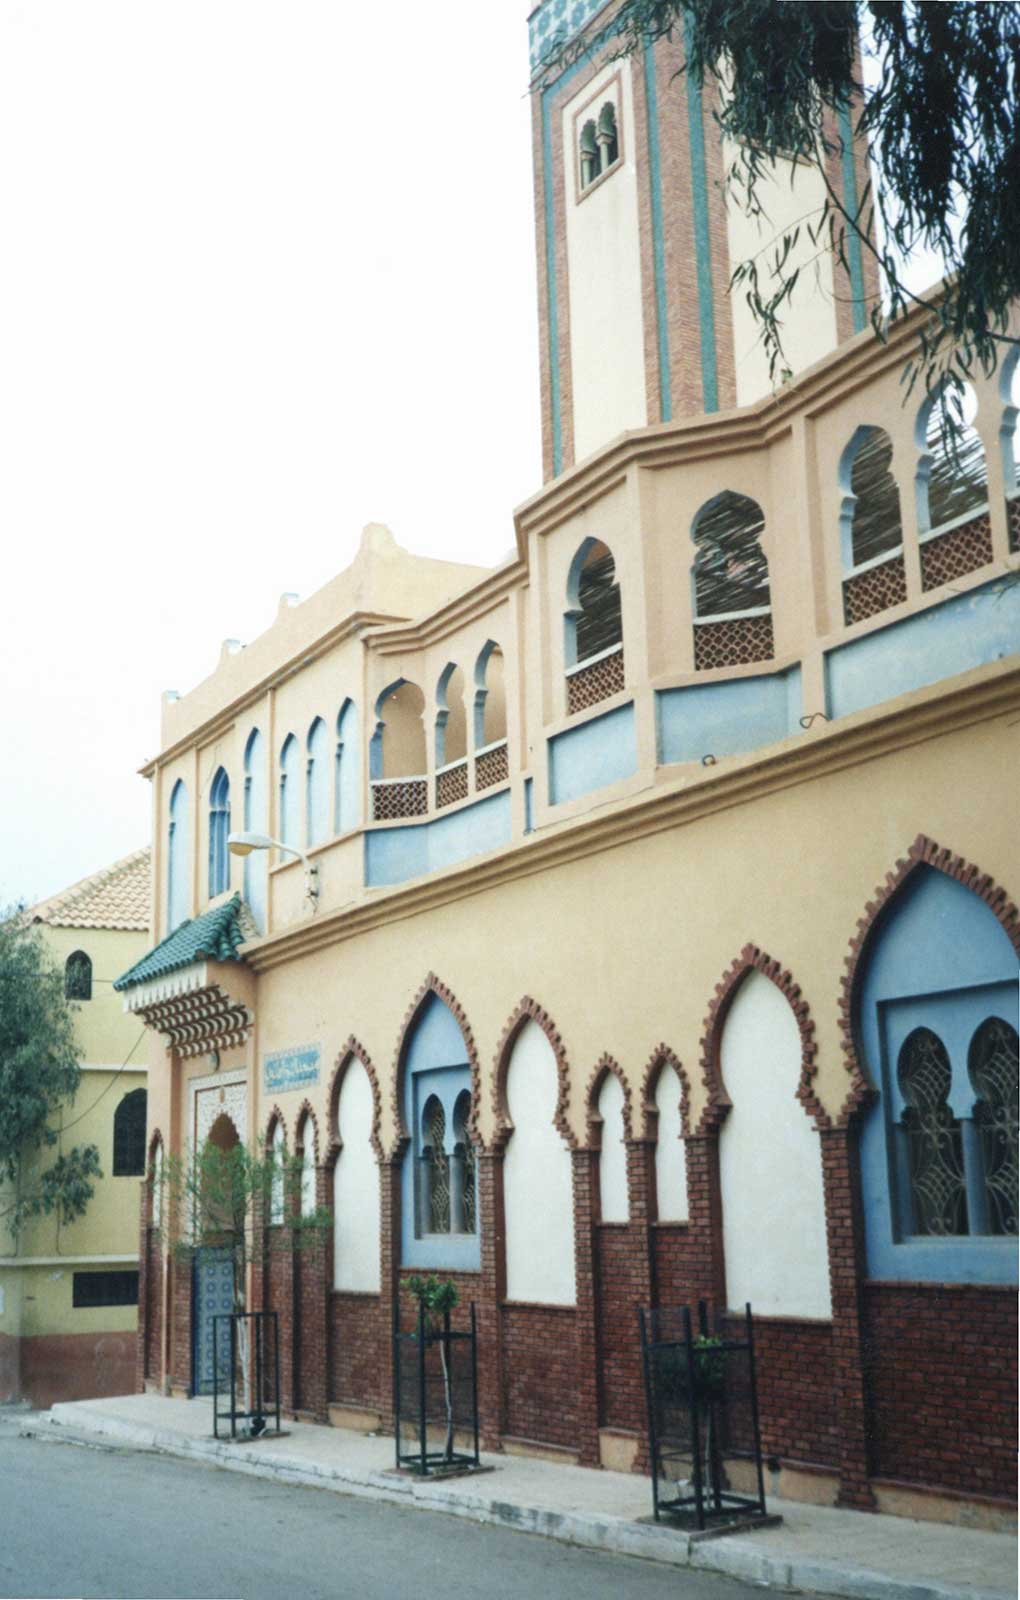 North building containing the school (ground floor) and the mosque (above).